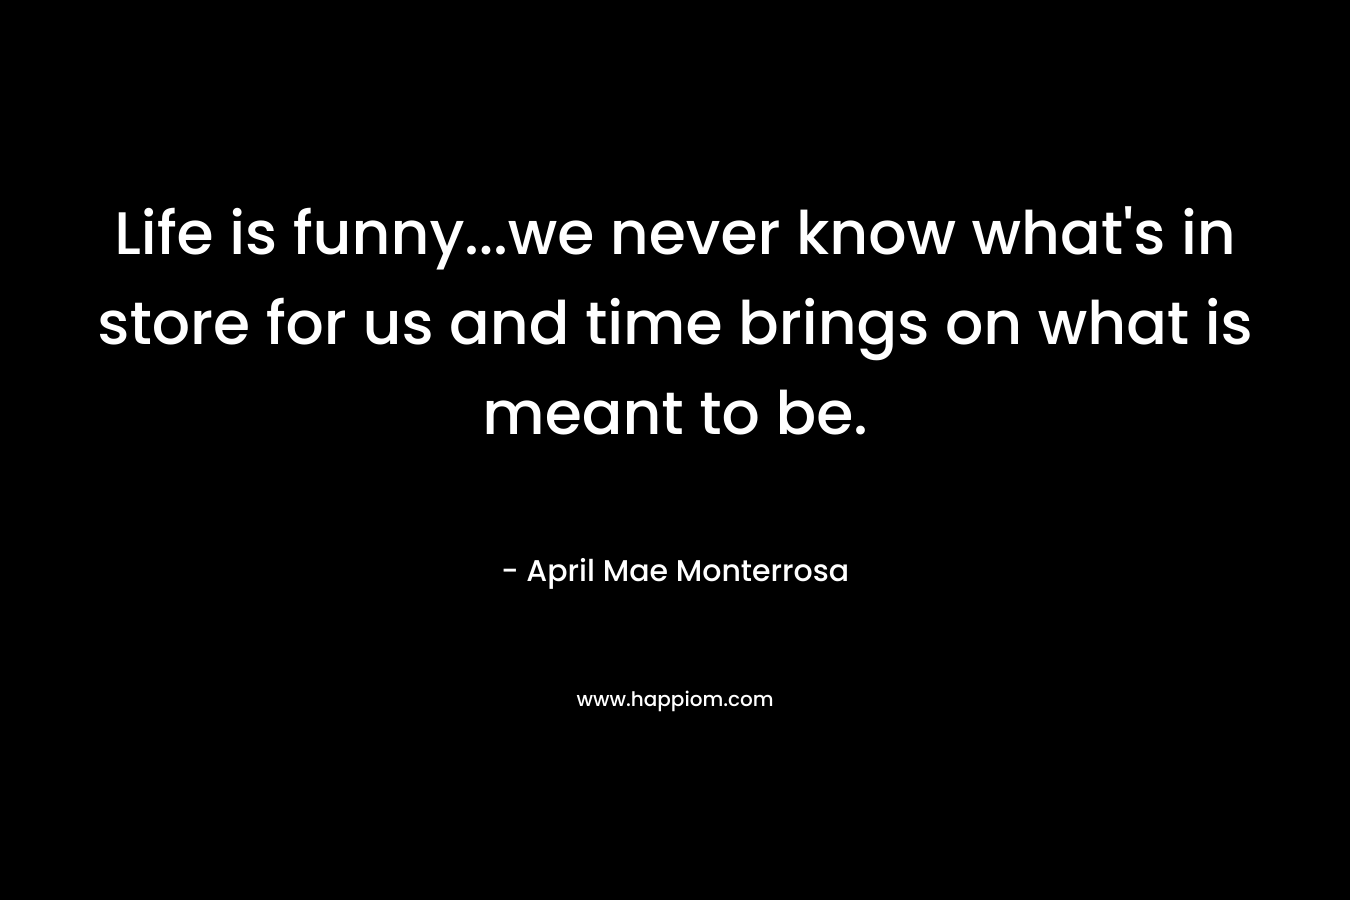 Life is funny…we never know what’s in store for us and time brings on what is meant to be. – April Mae Monterrosa